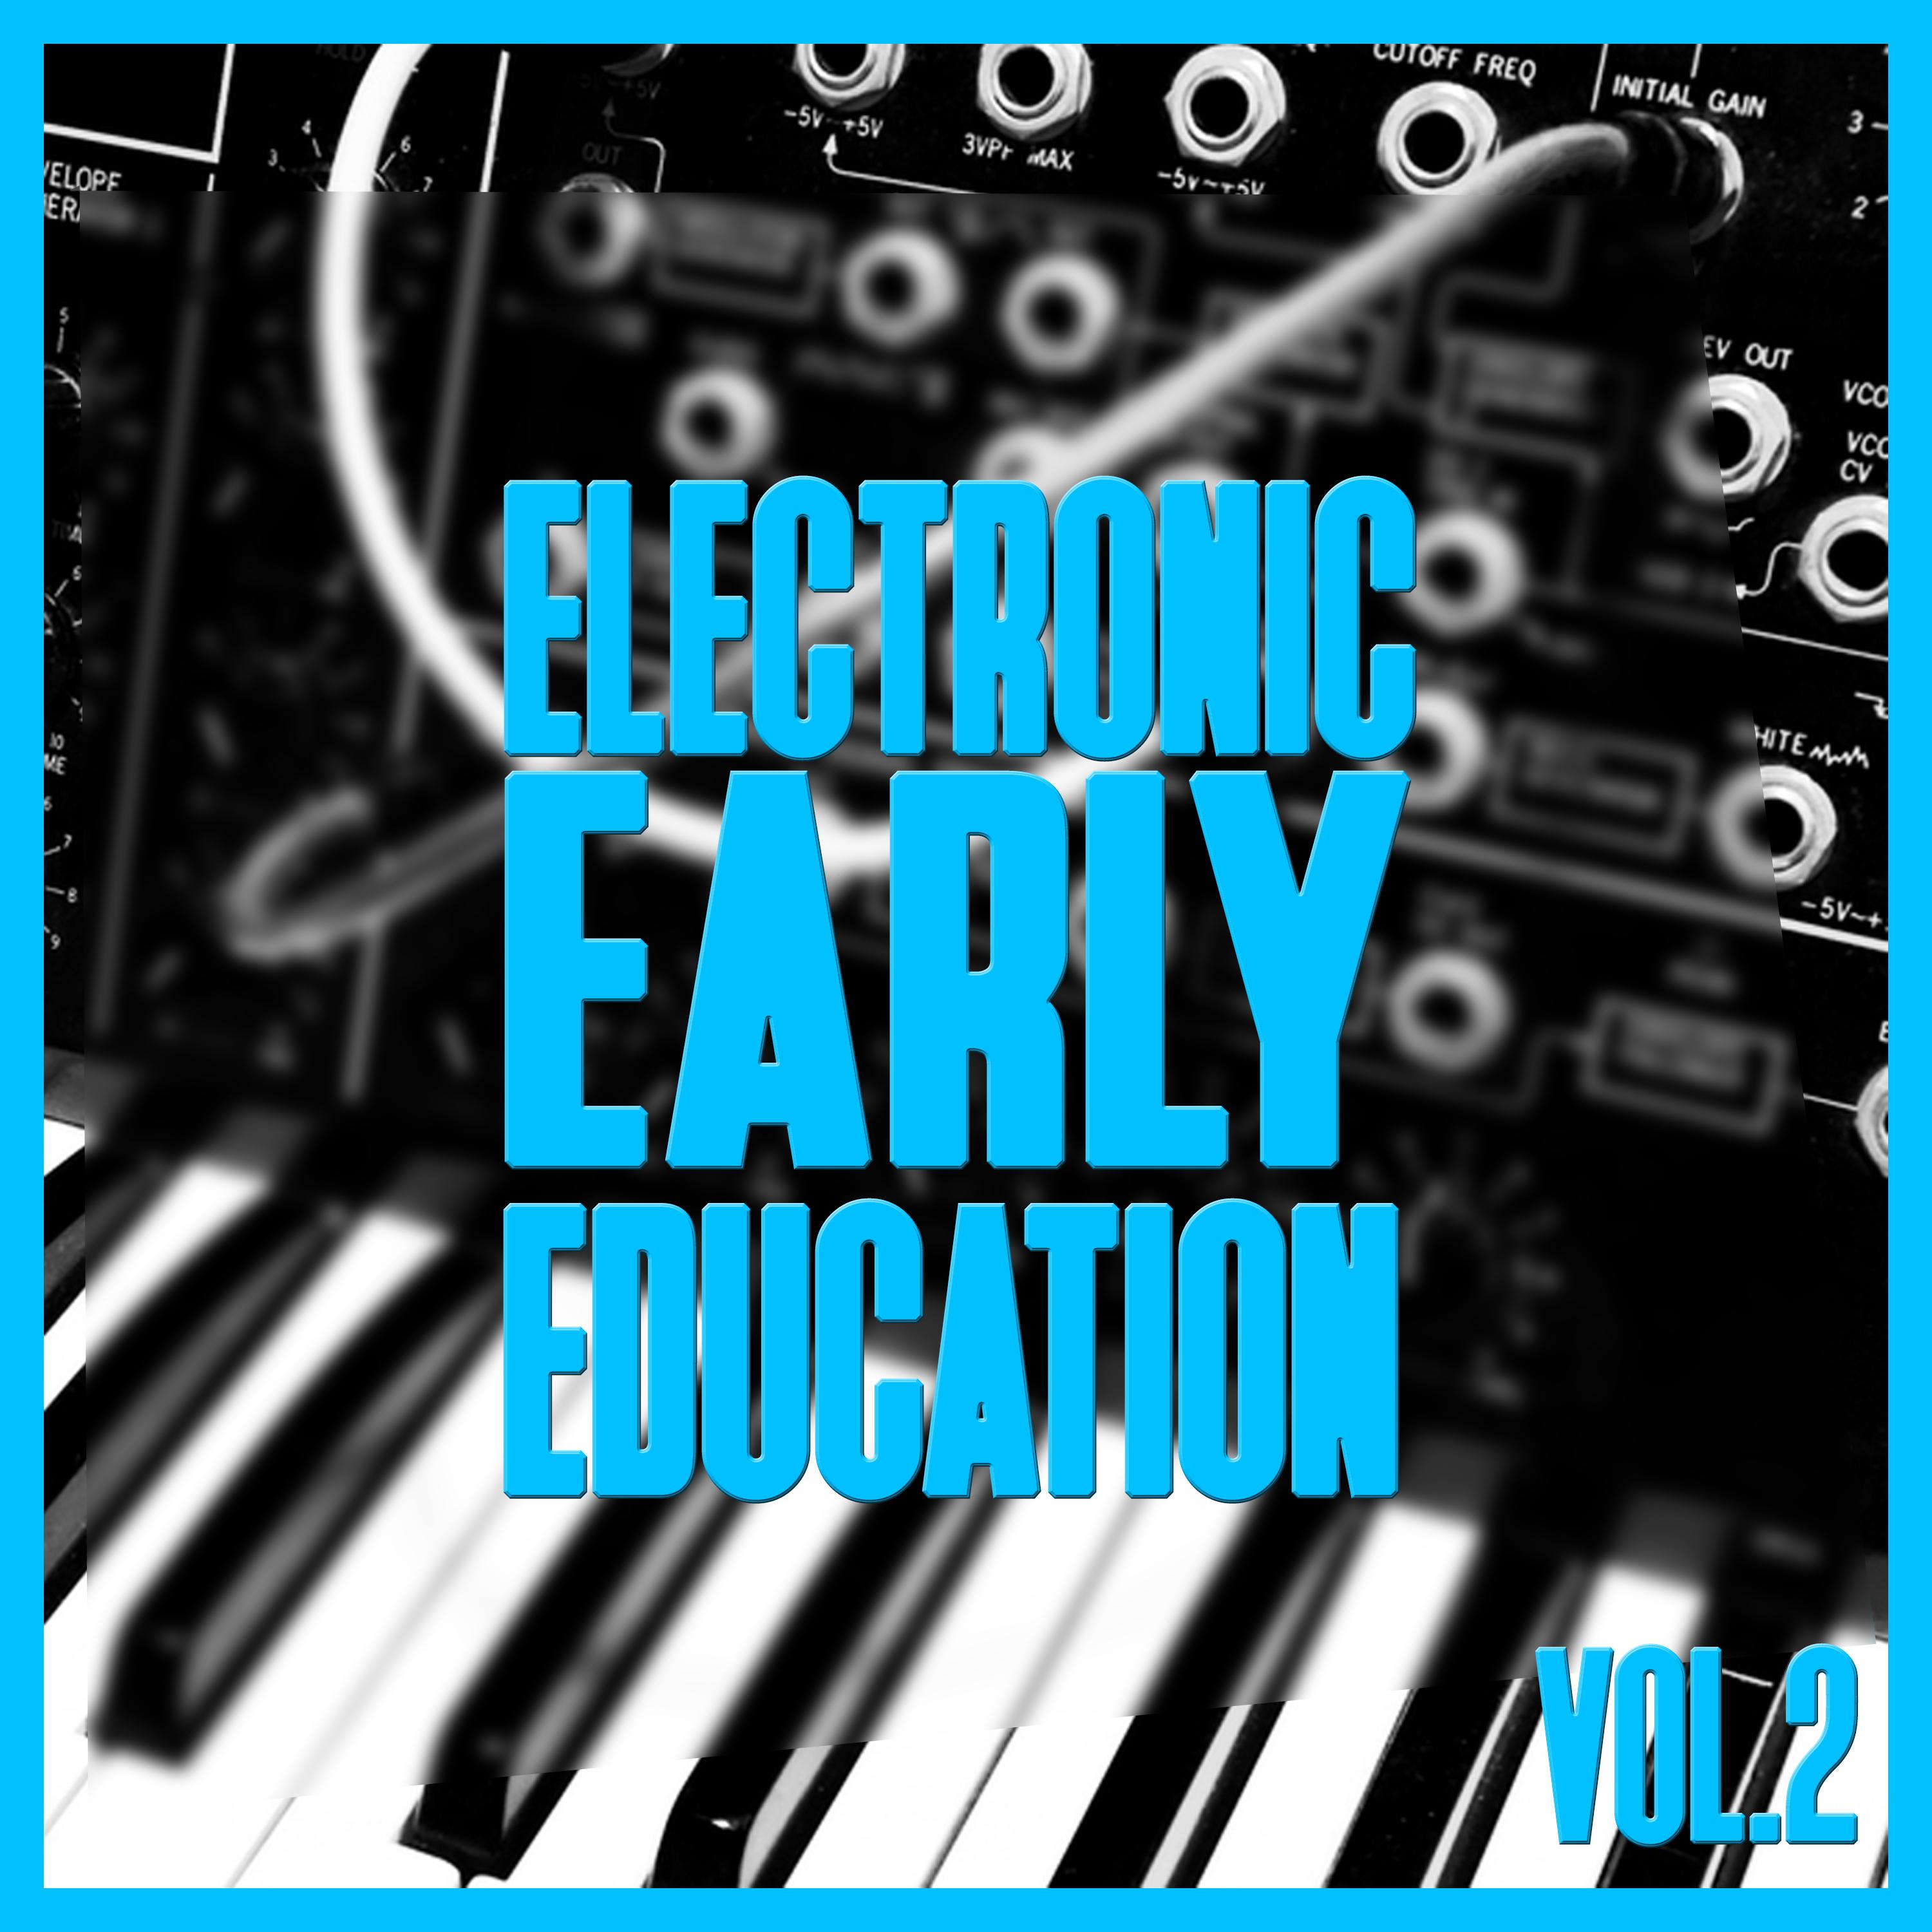 Electronic Early Education, Vol. 2